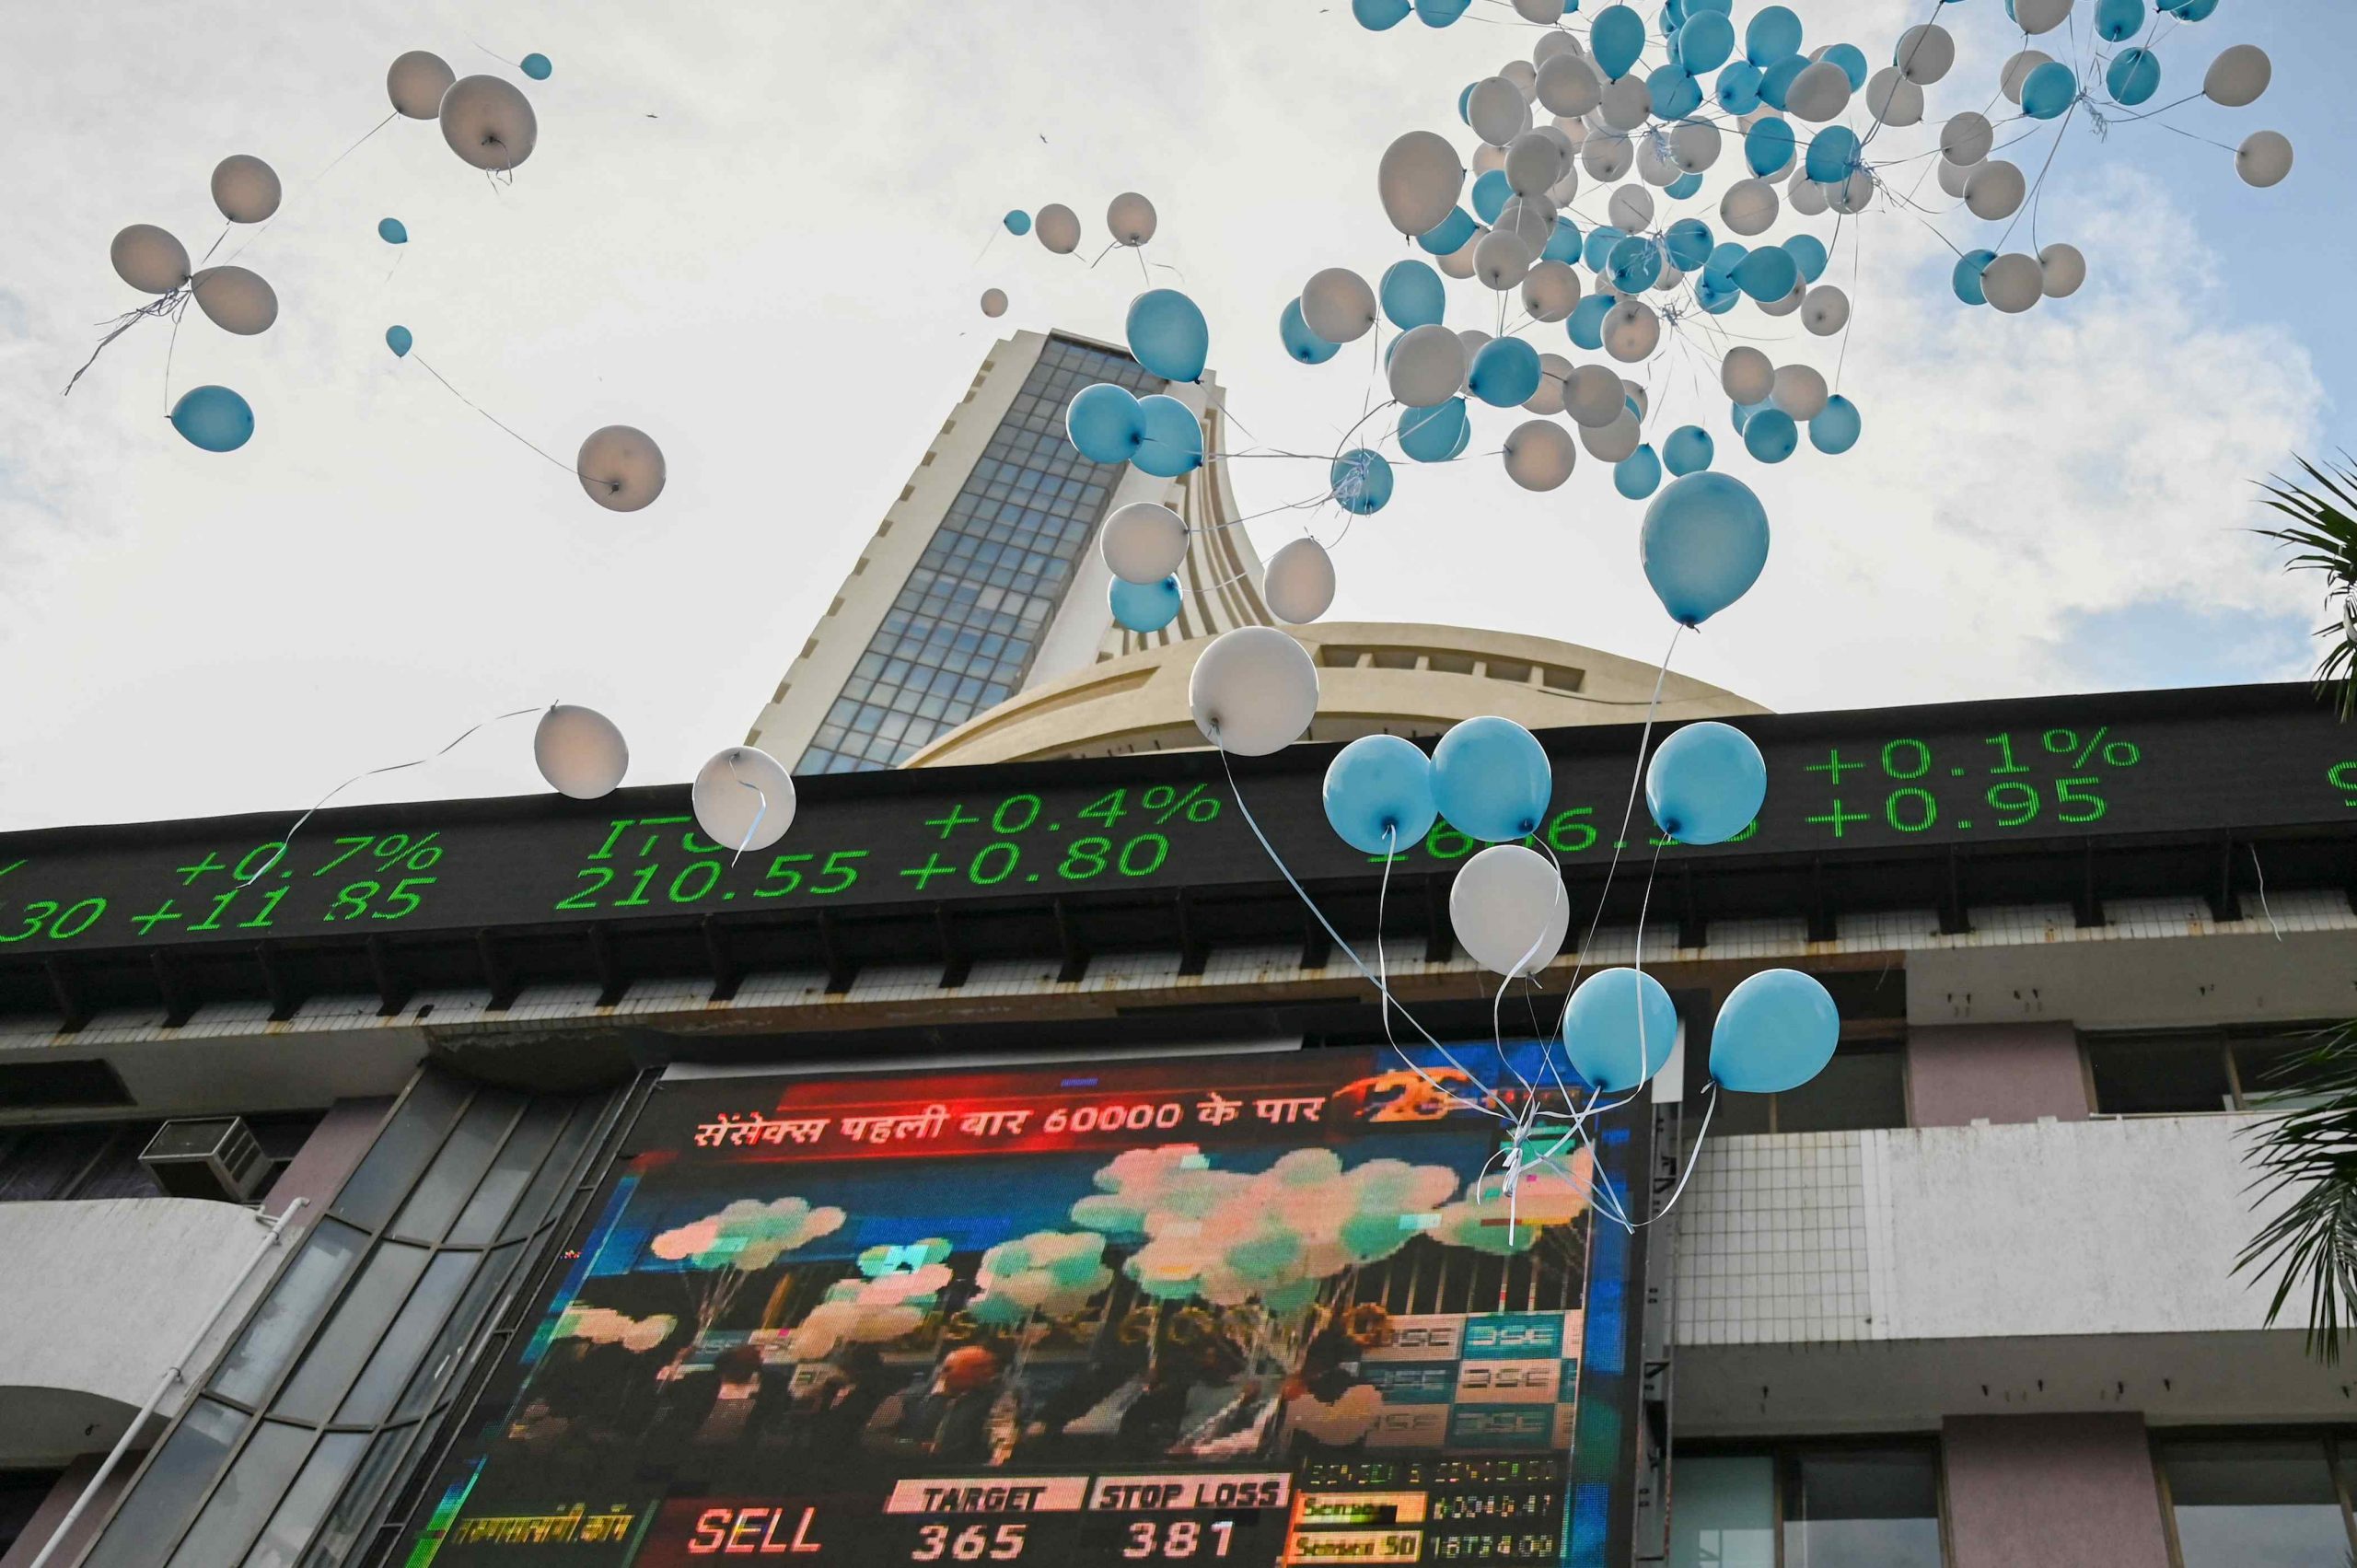 Balloons are released at the entrance of the Bombay Stock Exchange (BSE) to celebrate the benchmark of the Sensex index, which climbed above 60,000 points, in Mumbai on September 24, 2021. Punit PARANJPE / AFP